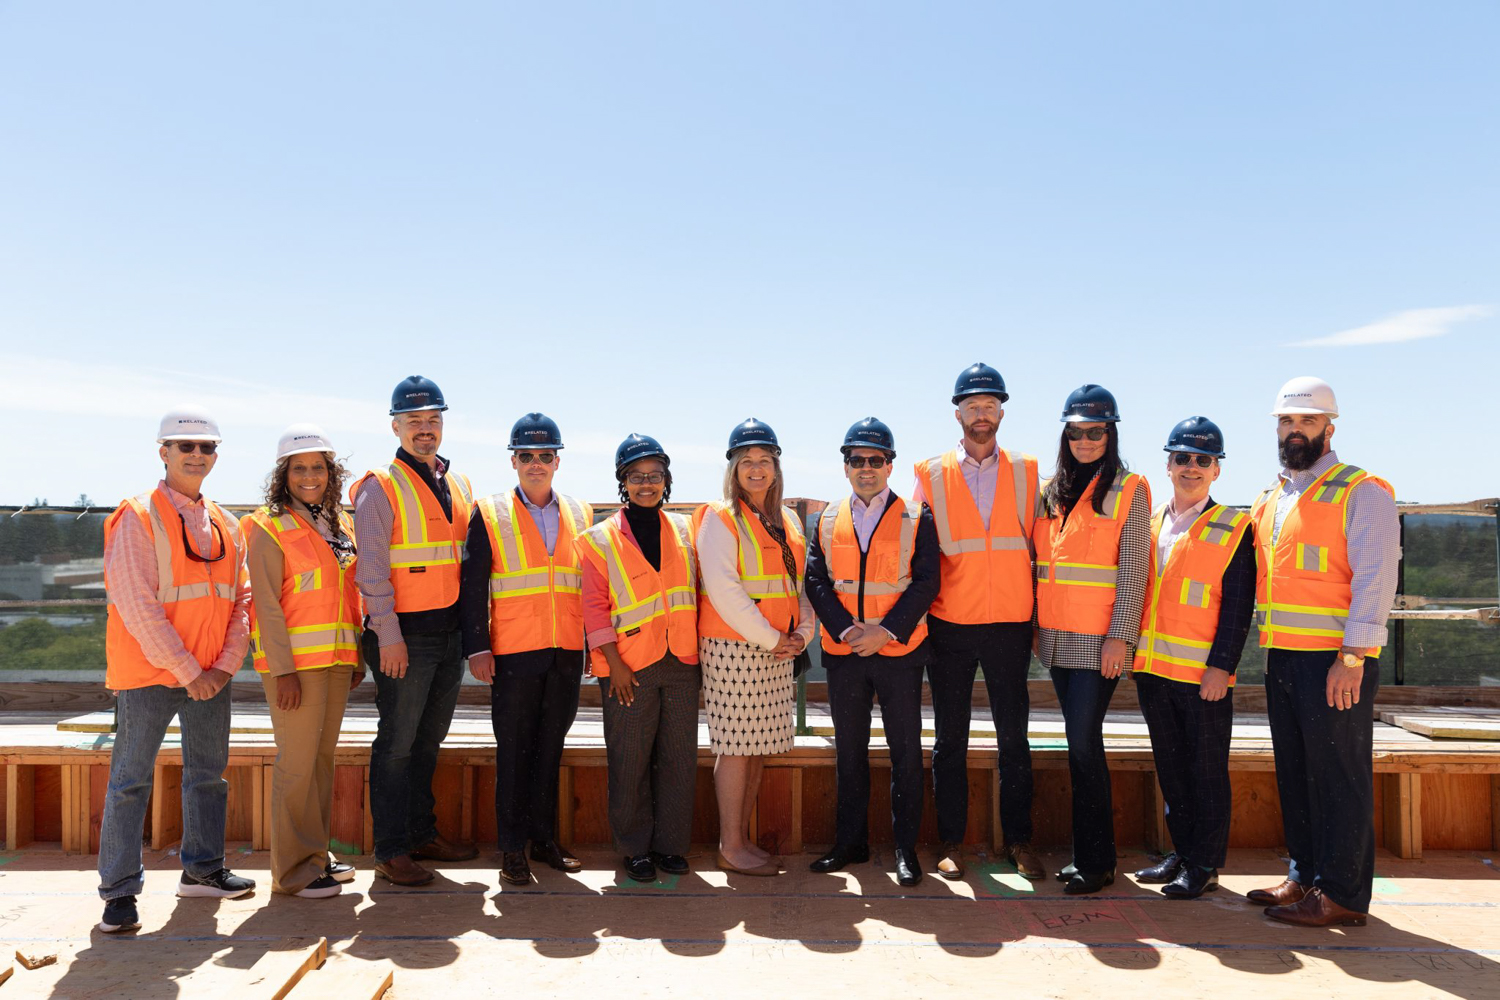 420 Mendocino Avenue topping out ceremony, image by Related California